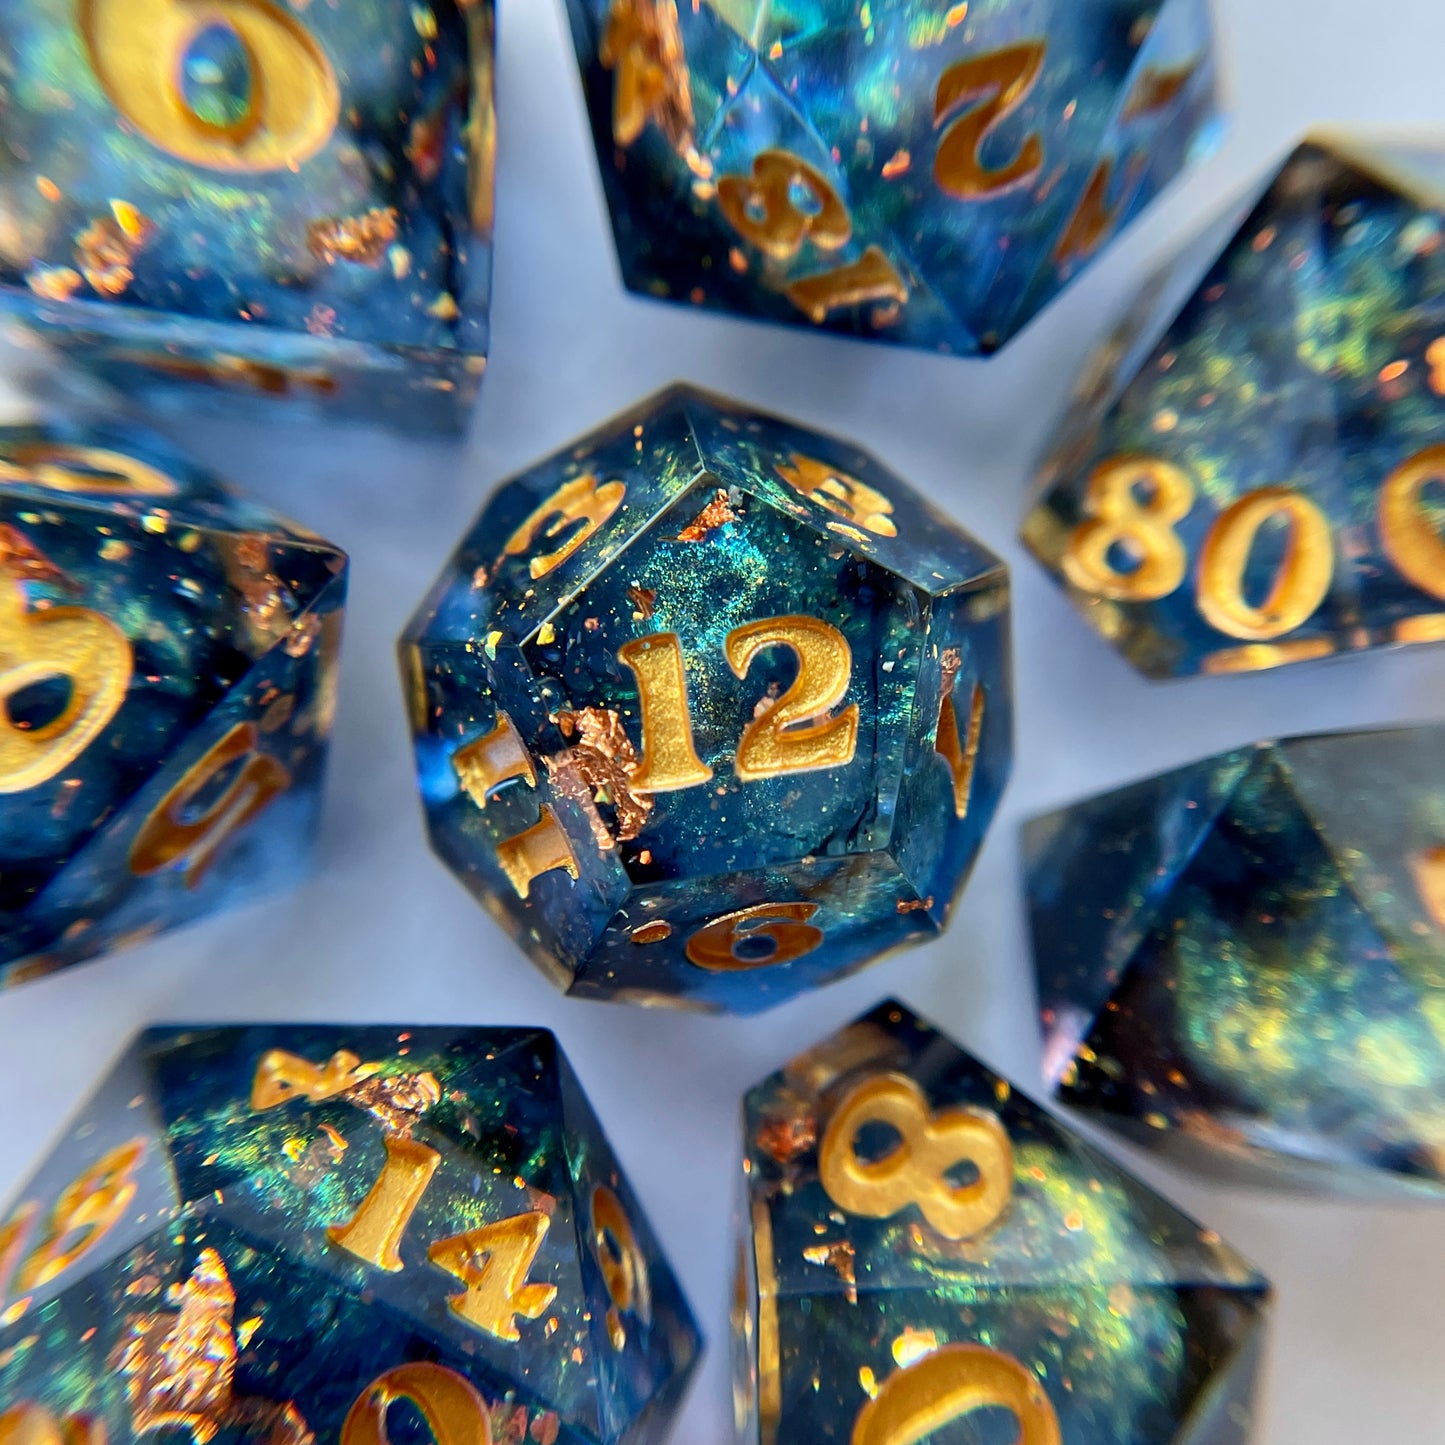 Starry Night – 7-piece Polyhedral Dice Set